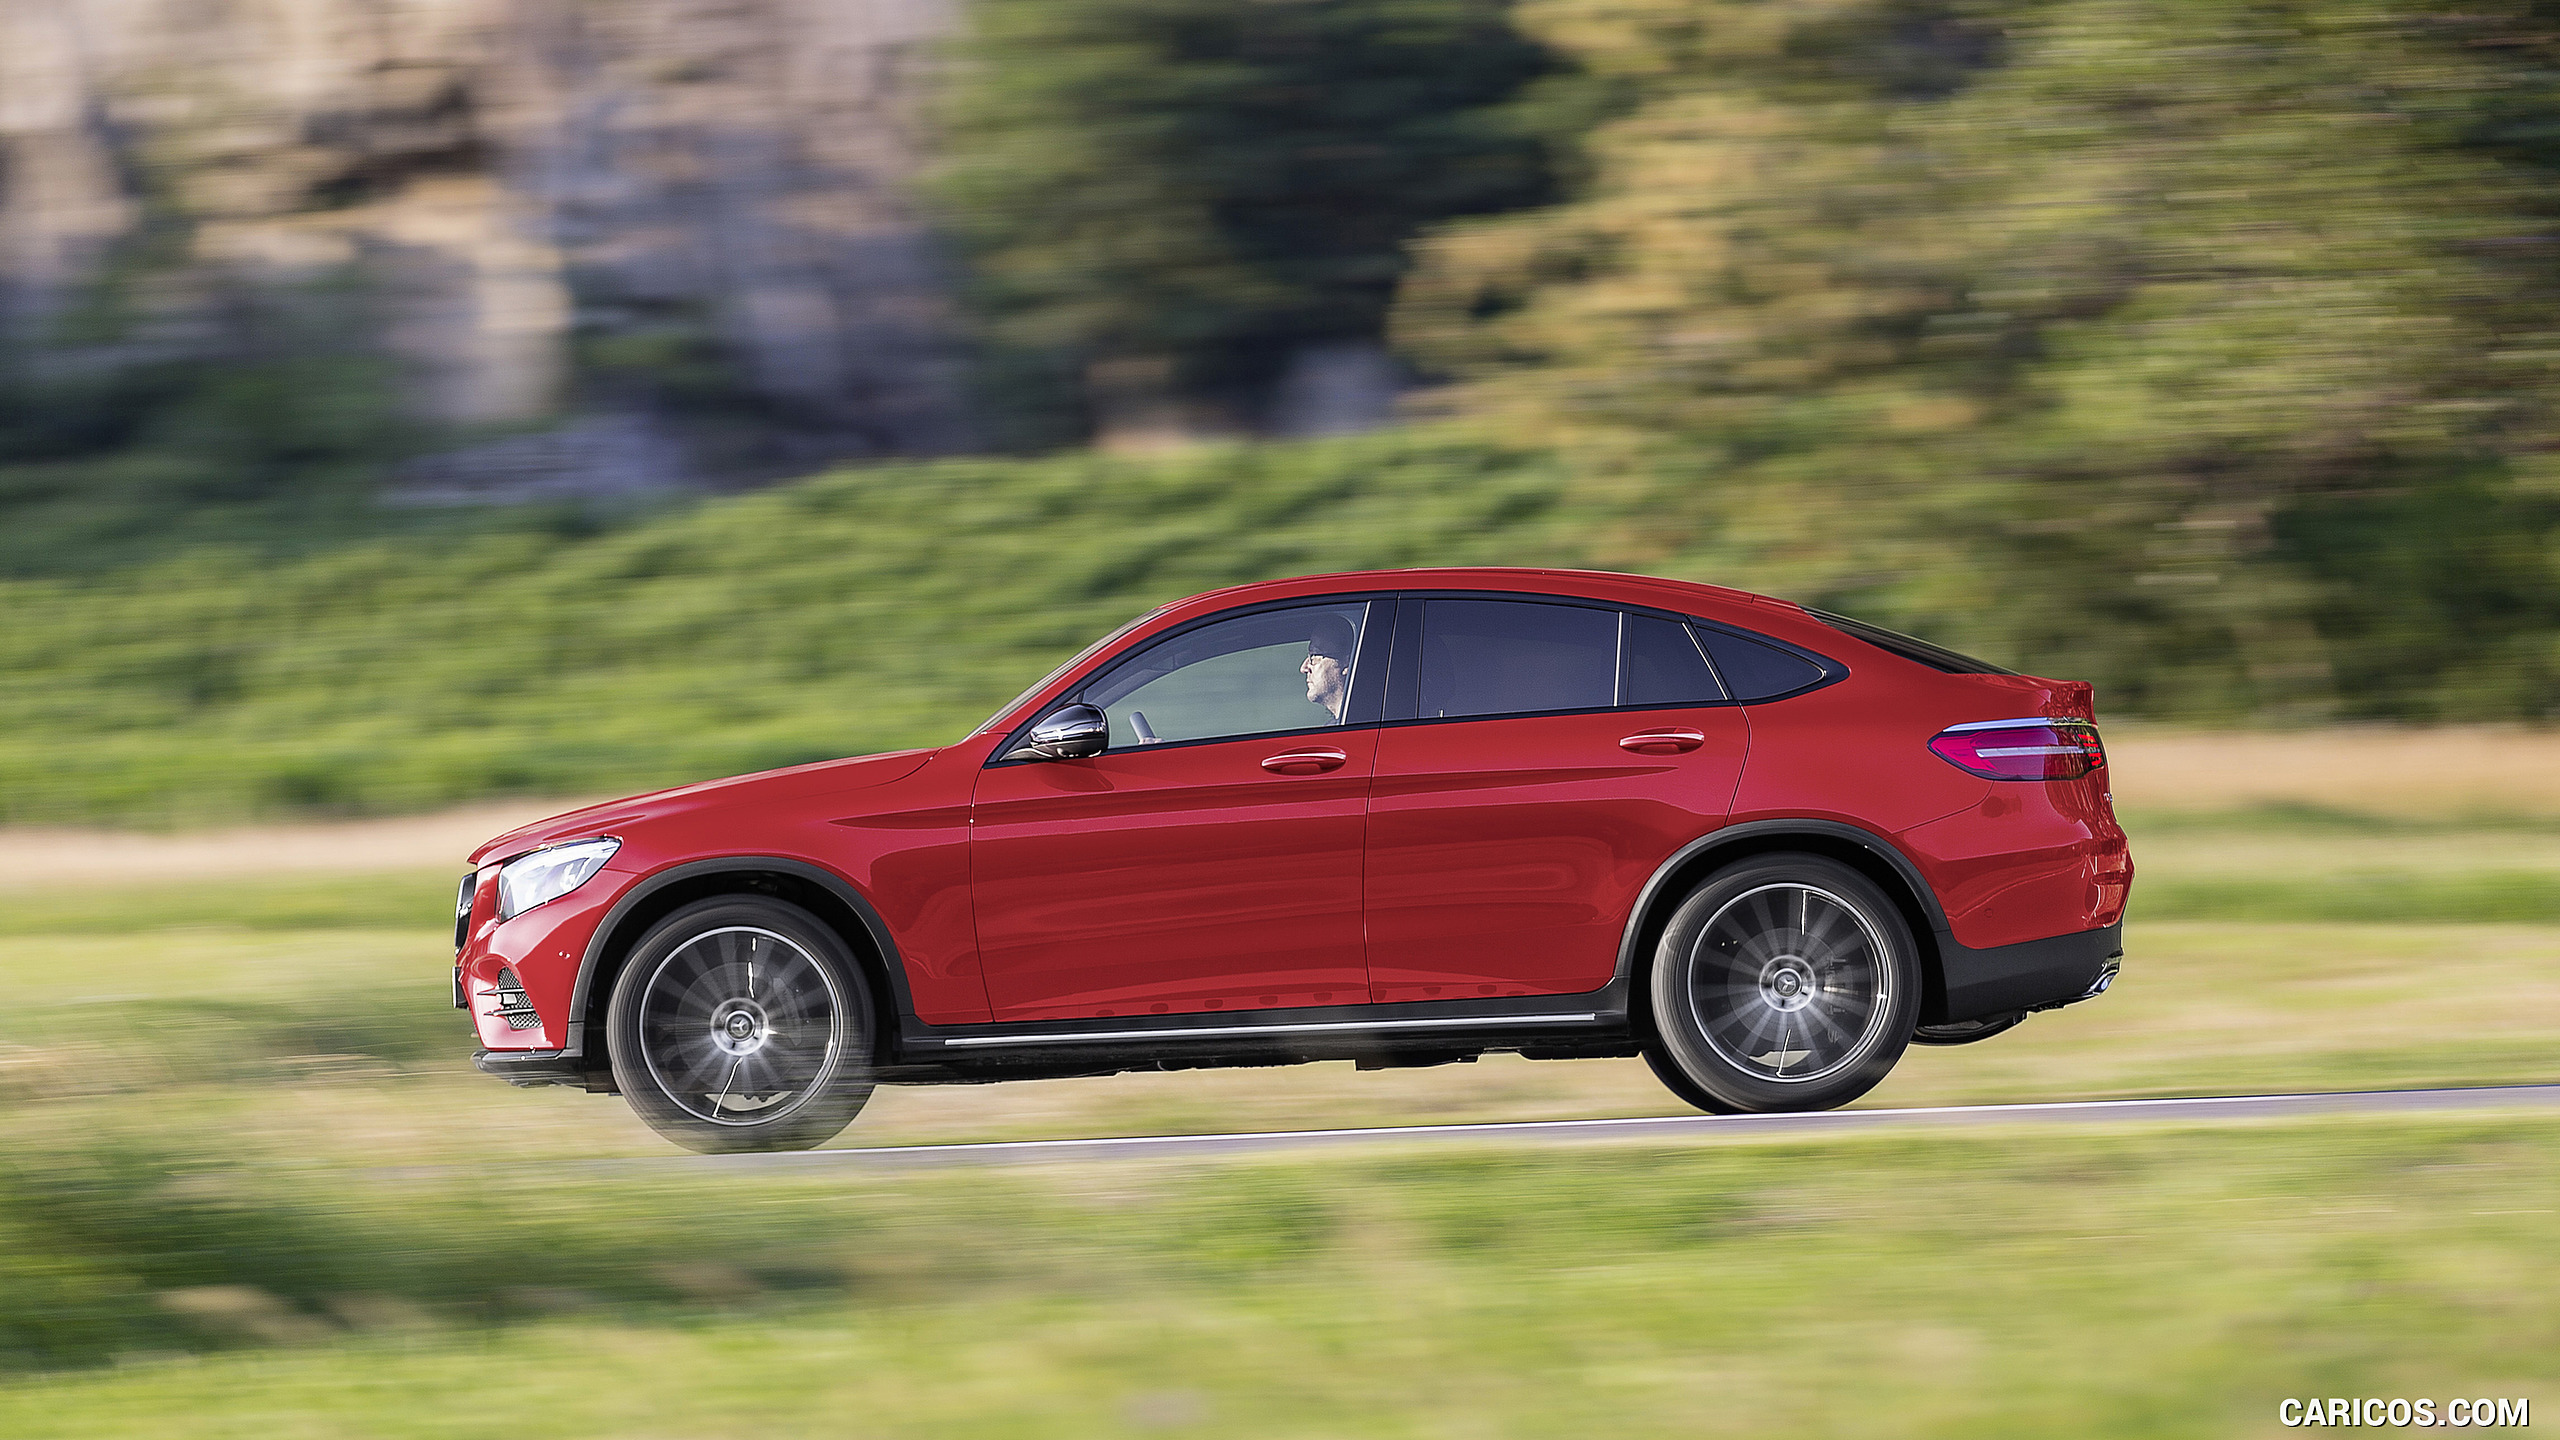 2017 Mercedes-Benz GLC 350 d Coupe (Diesel; Color: Hyacinth Red) - Side, #86 of 144